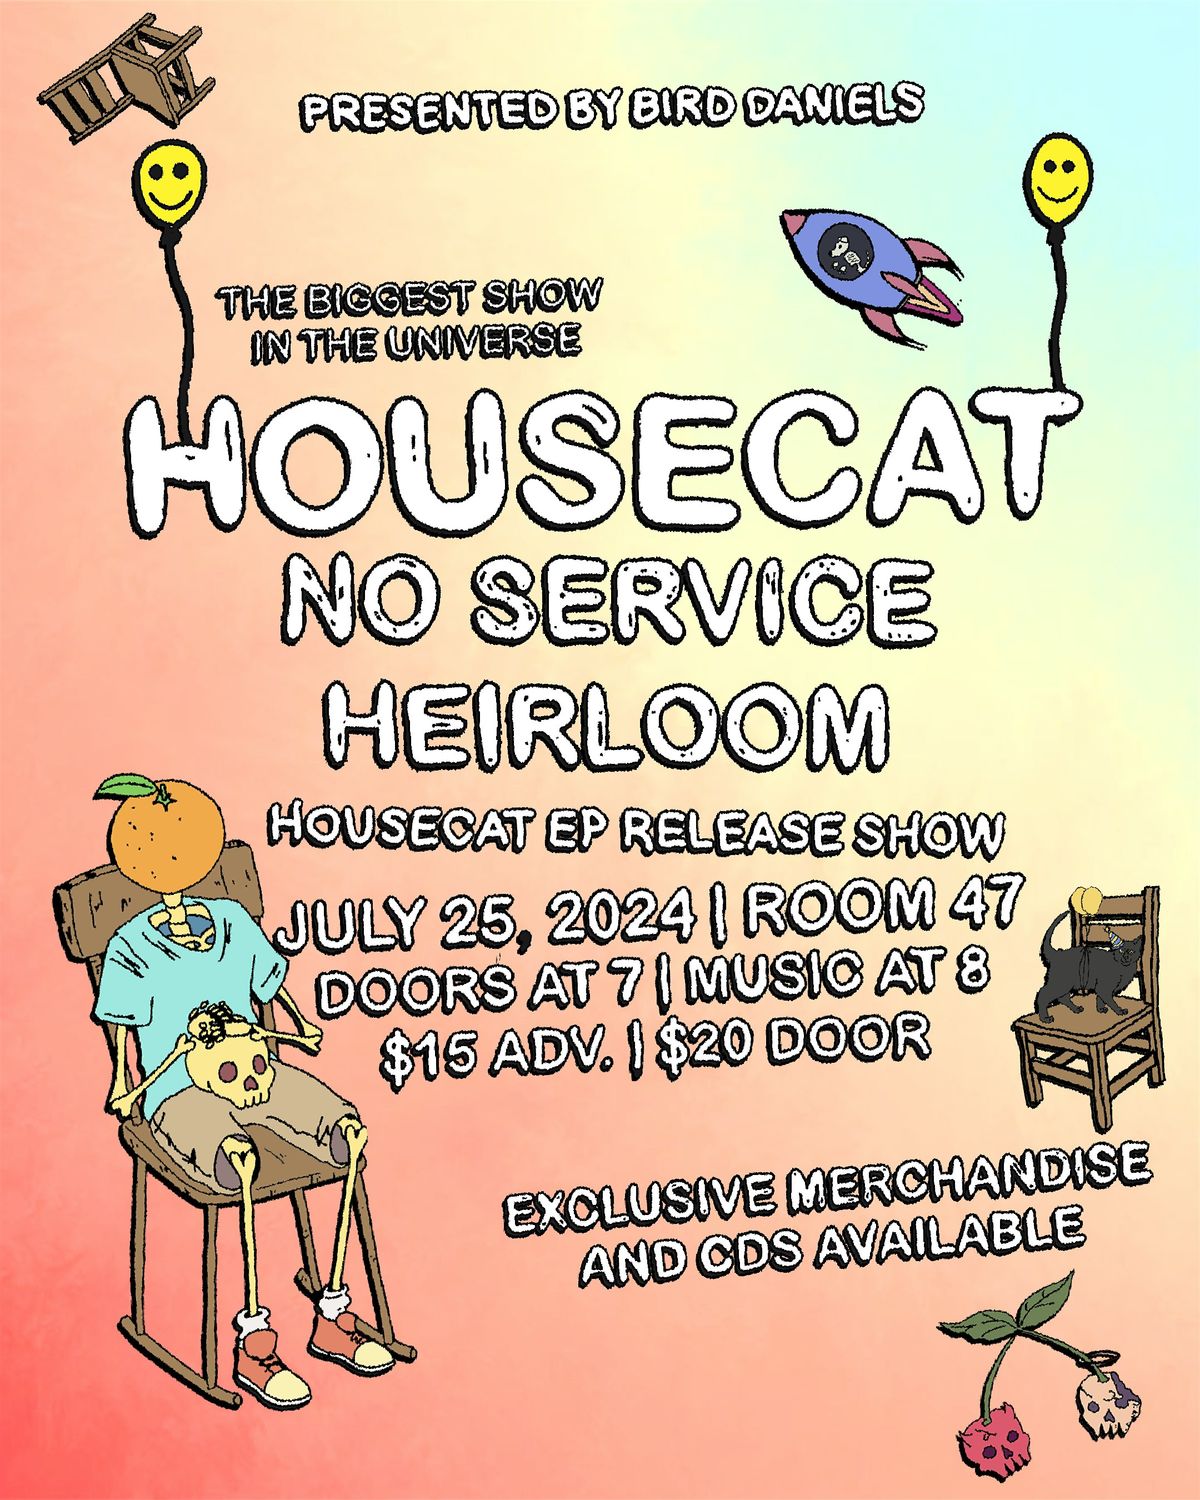 HOUSECAT EP RELEASE SHOW, with No Service & Heir Loom.